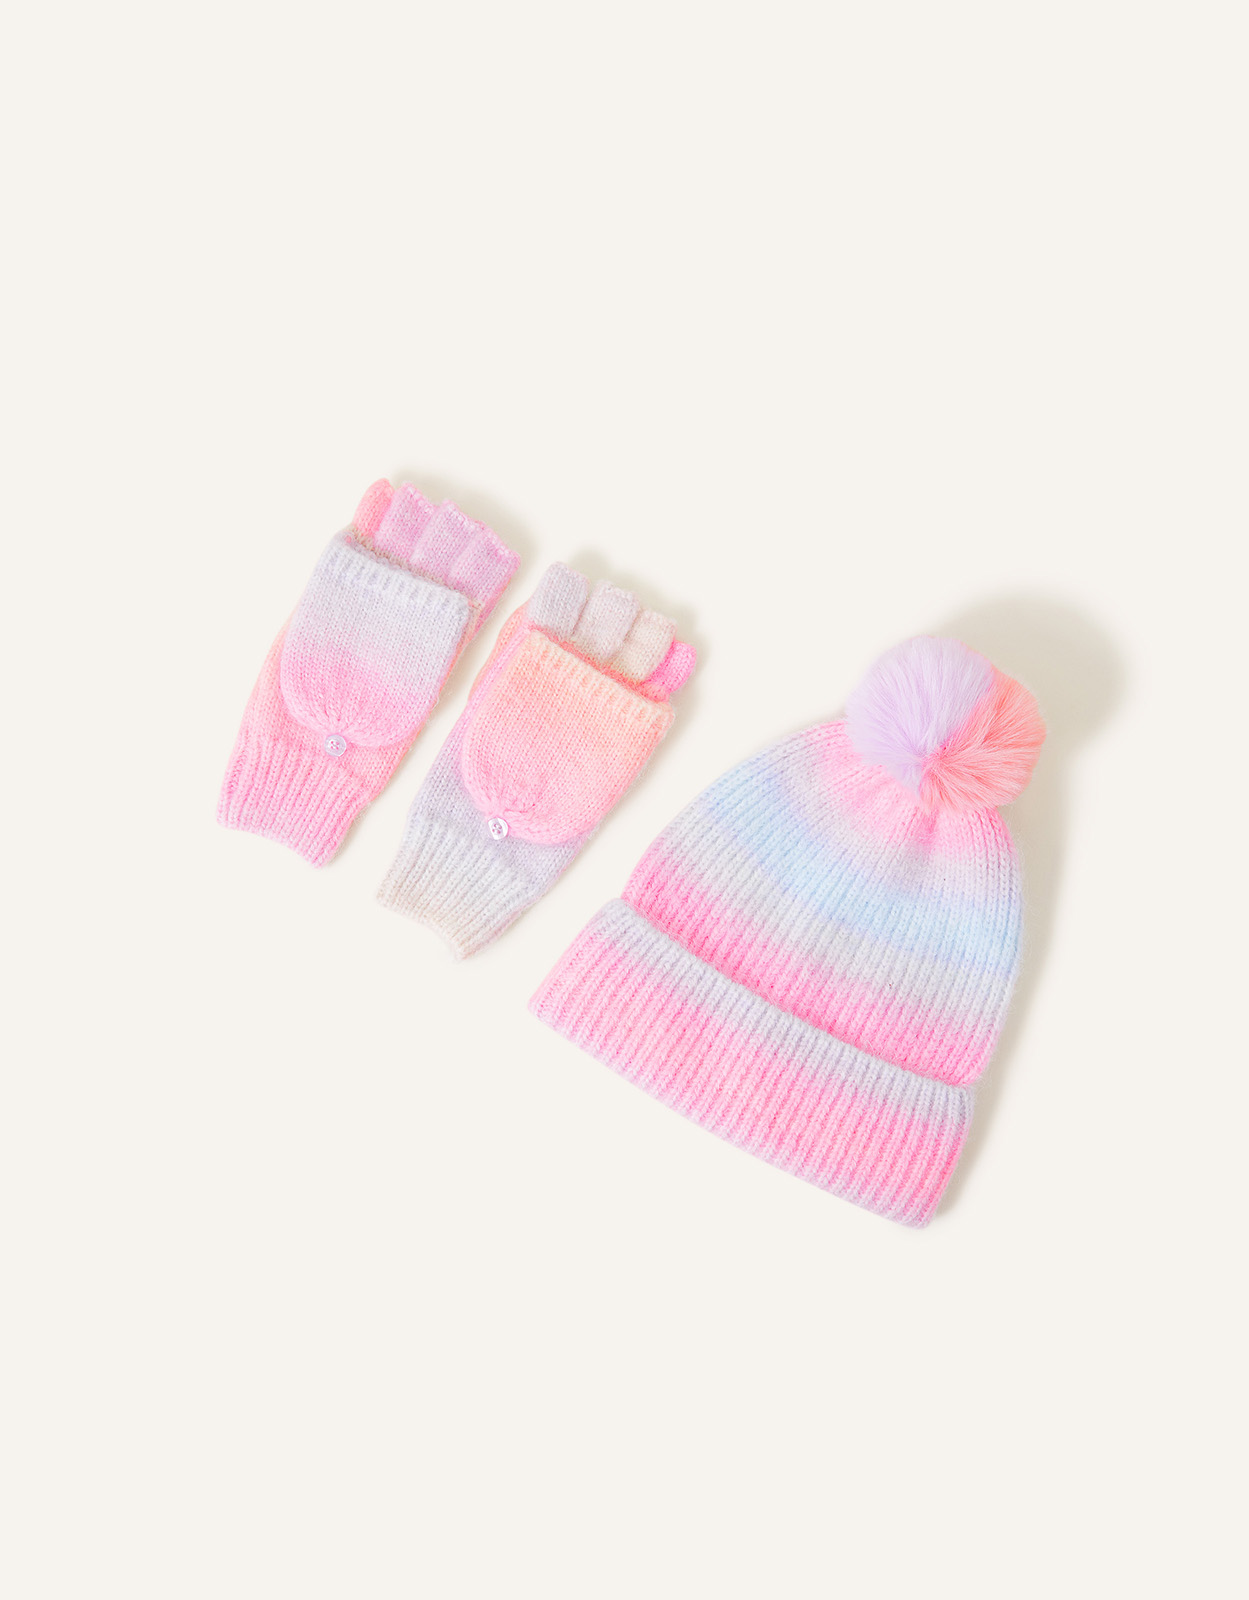 Accessorize Girl's Girls Rainbow Hat and Gloves Set Multi, Size: 6-8 yrs